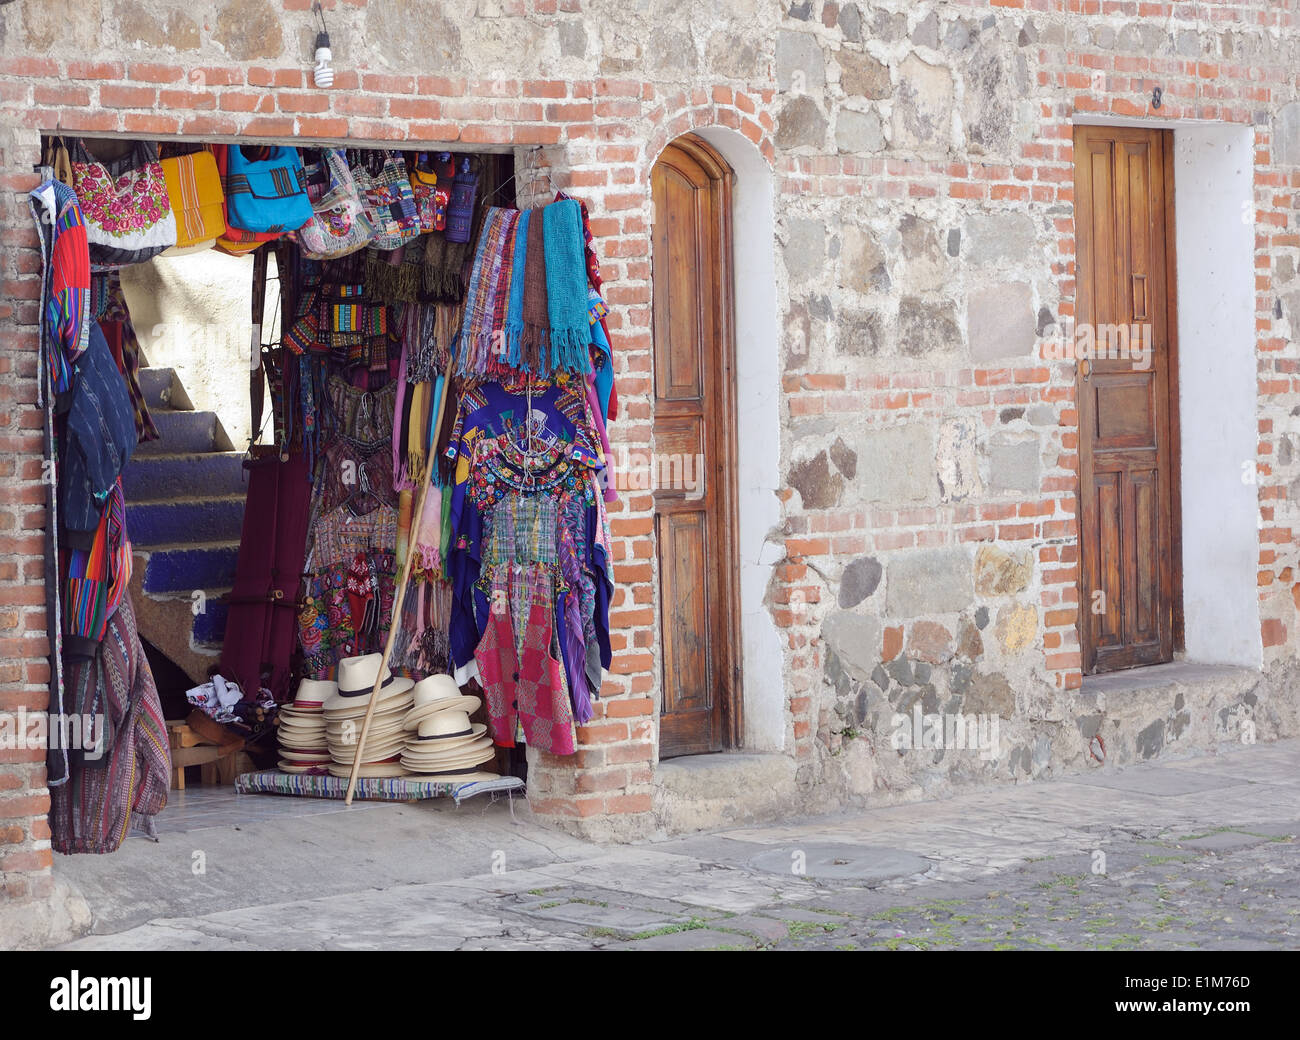 Panama hats, scarves and bags for sale in a doorway. Antigua Guatemala, Republic of Guatemala. Stock Photo